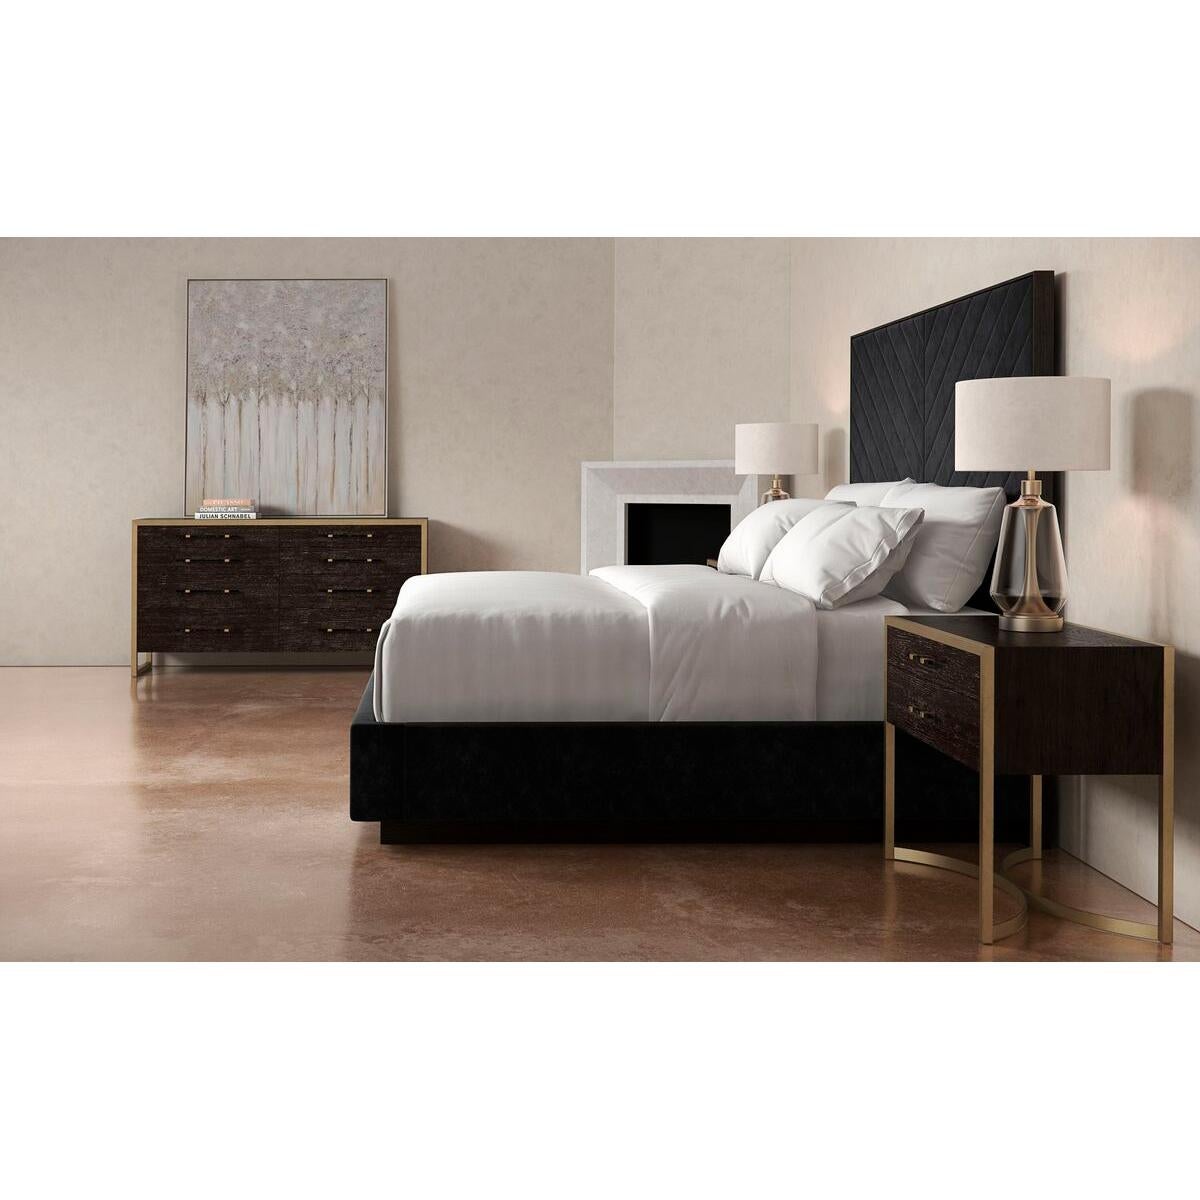 Upholstered King Bed with a black stain Ash finish frame. It has a tall upholstered headboard with a modern channel tufting design of converging angles that meet in the center to create a mesmerizing chevron. This bed’s fully finished sides appear